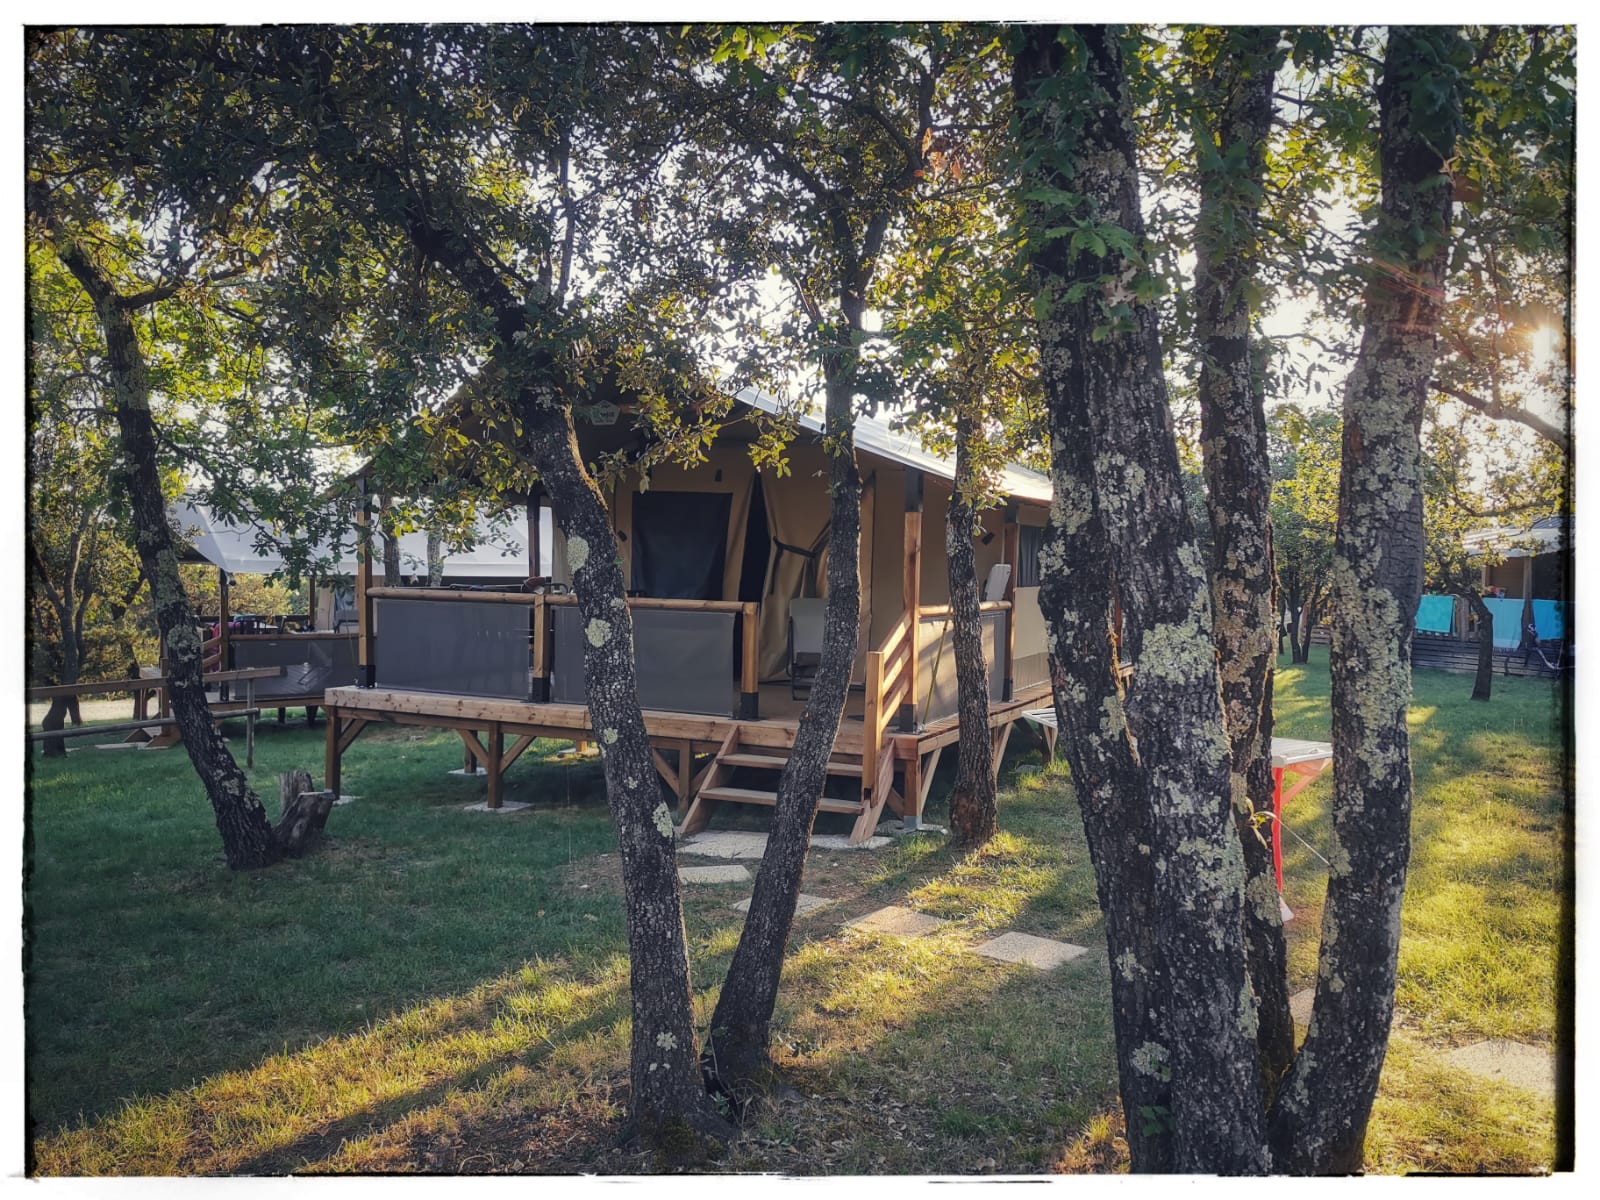 Huuraccommodatie - Lodge Nature Luxe -2 Bedrooms - Private Sanitary (Arrival On Sunday In High Season) - Camping L'Ombrage